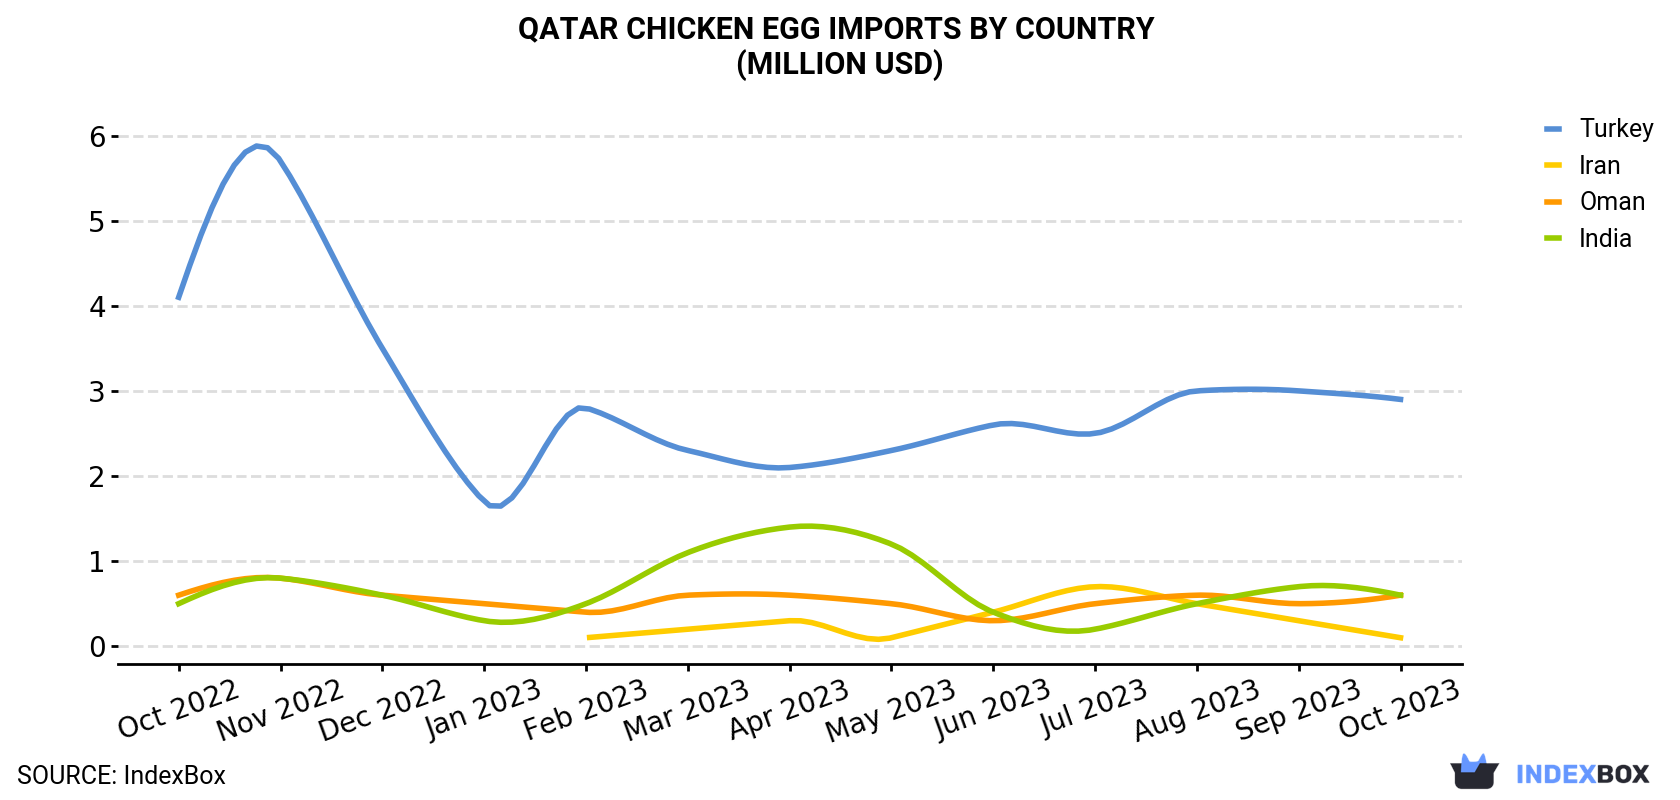 Qatar Chicken Egg Imports By Country (Million USD)